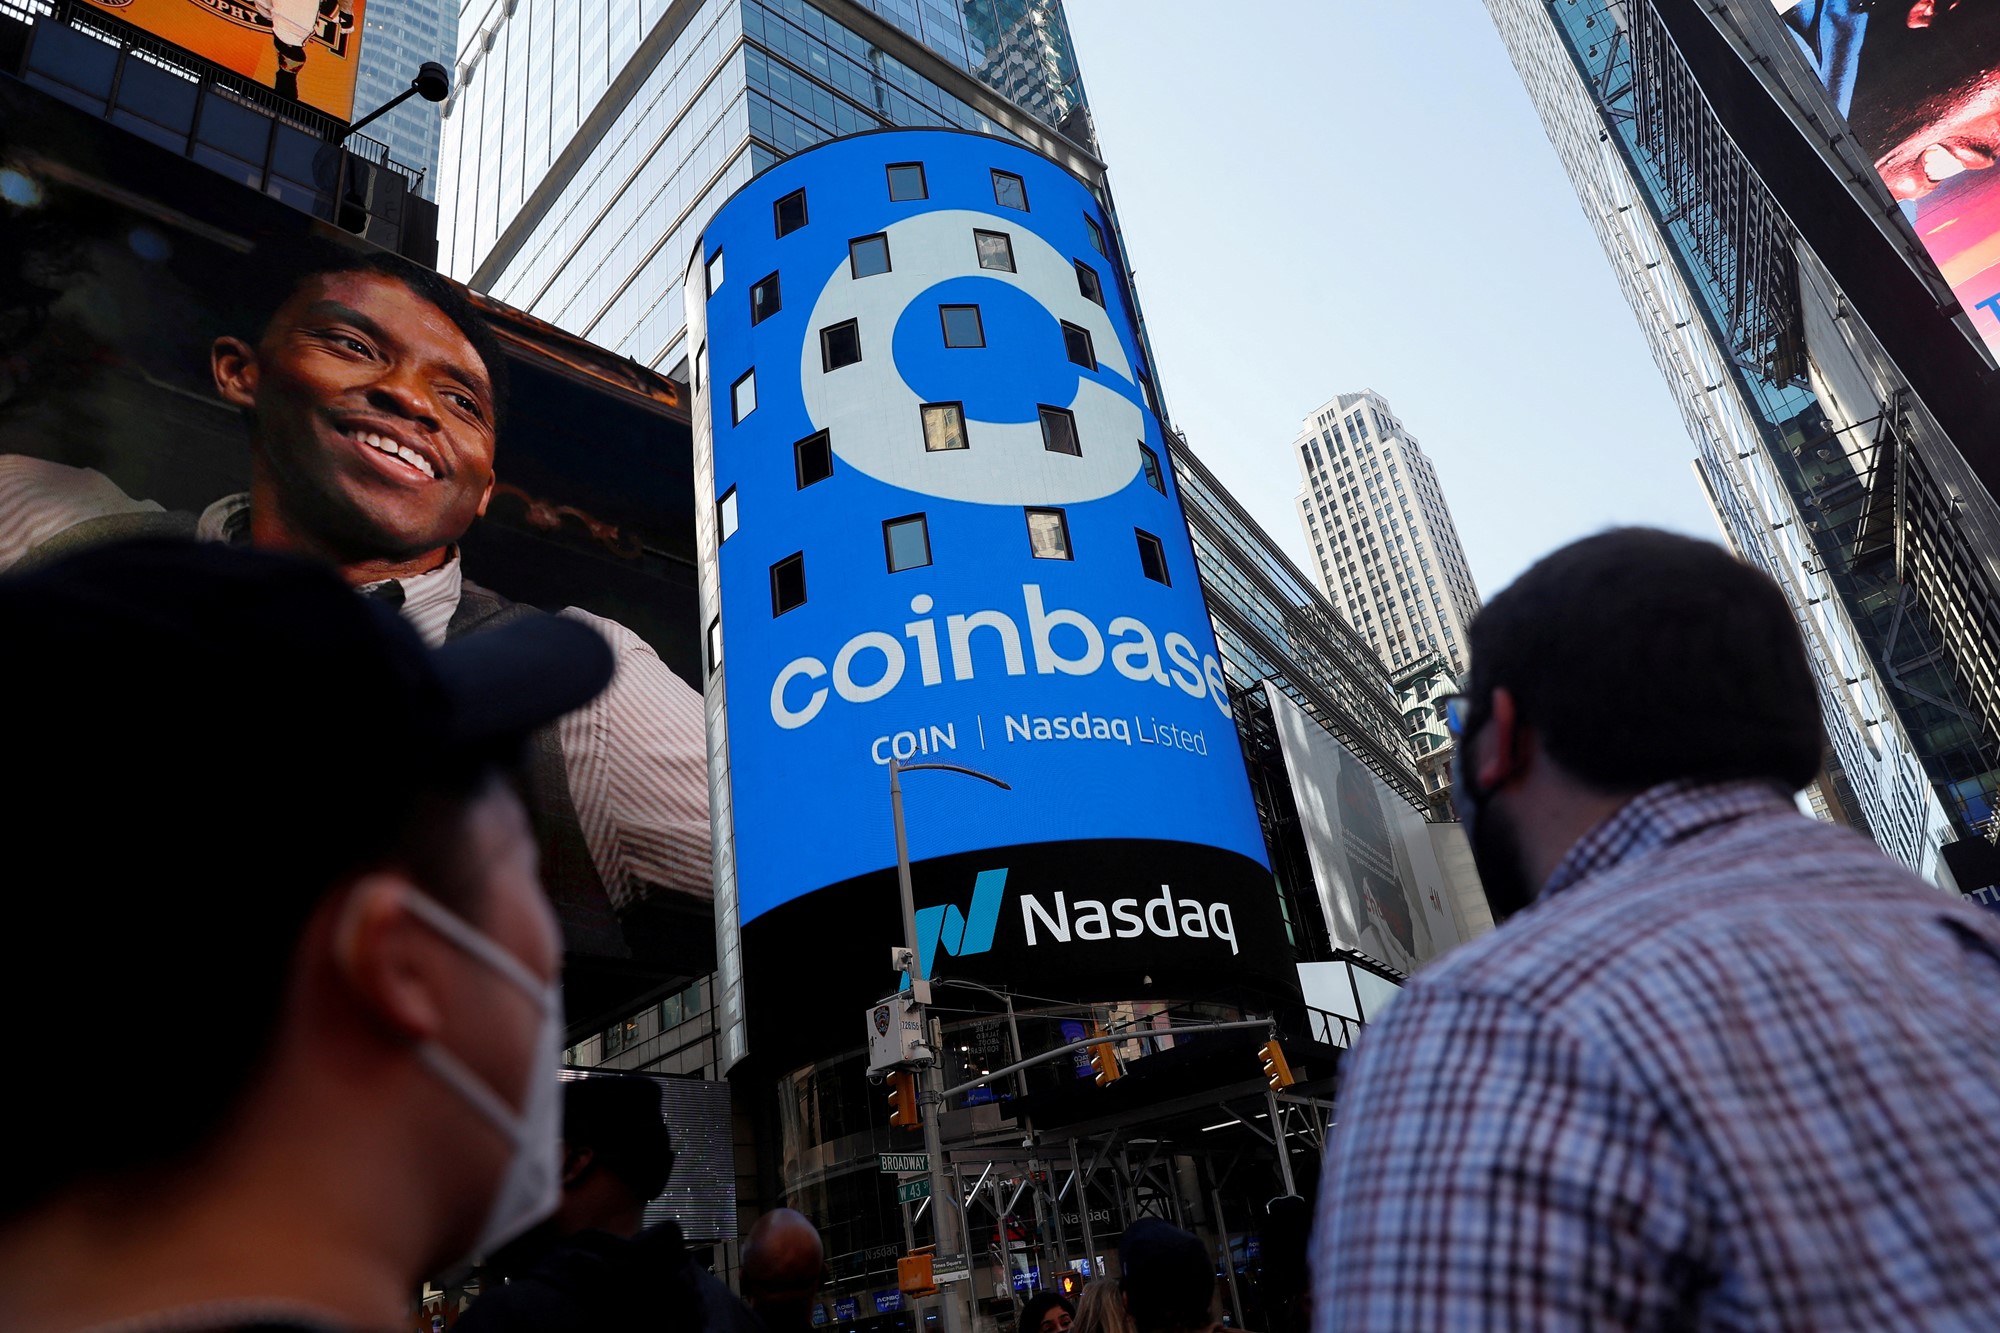 People look up at a blue advertisement for Coinbase on the side of a building at Times Square in New York.